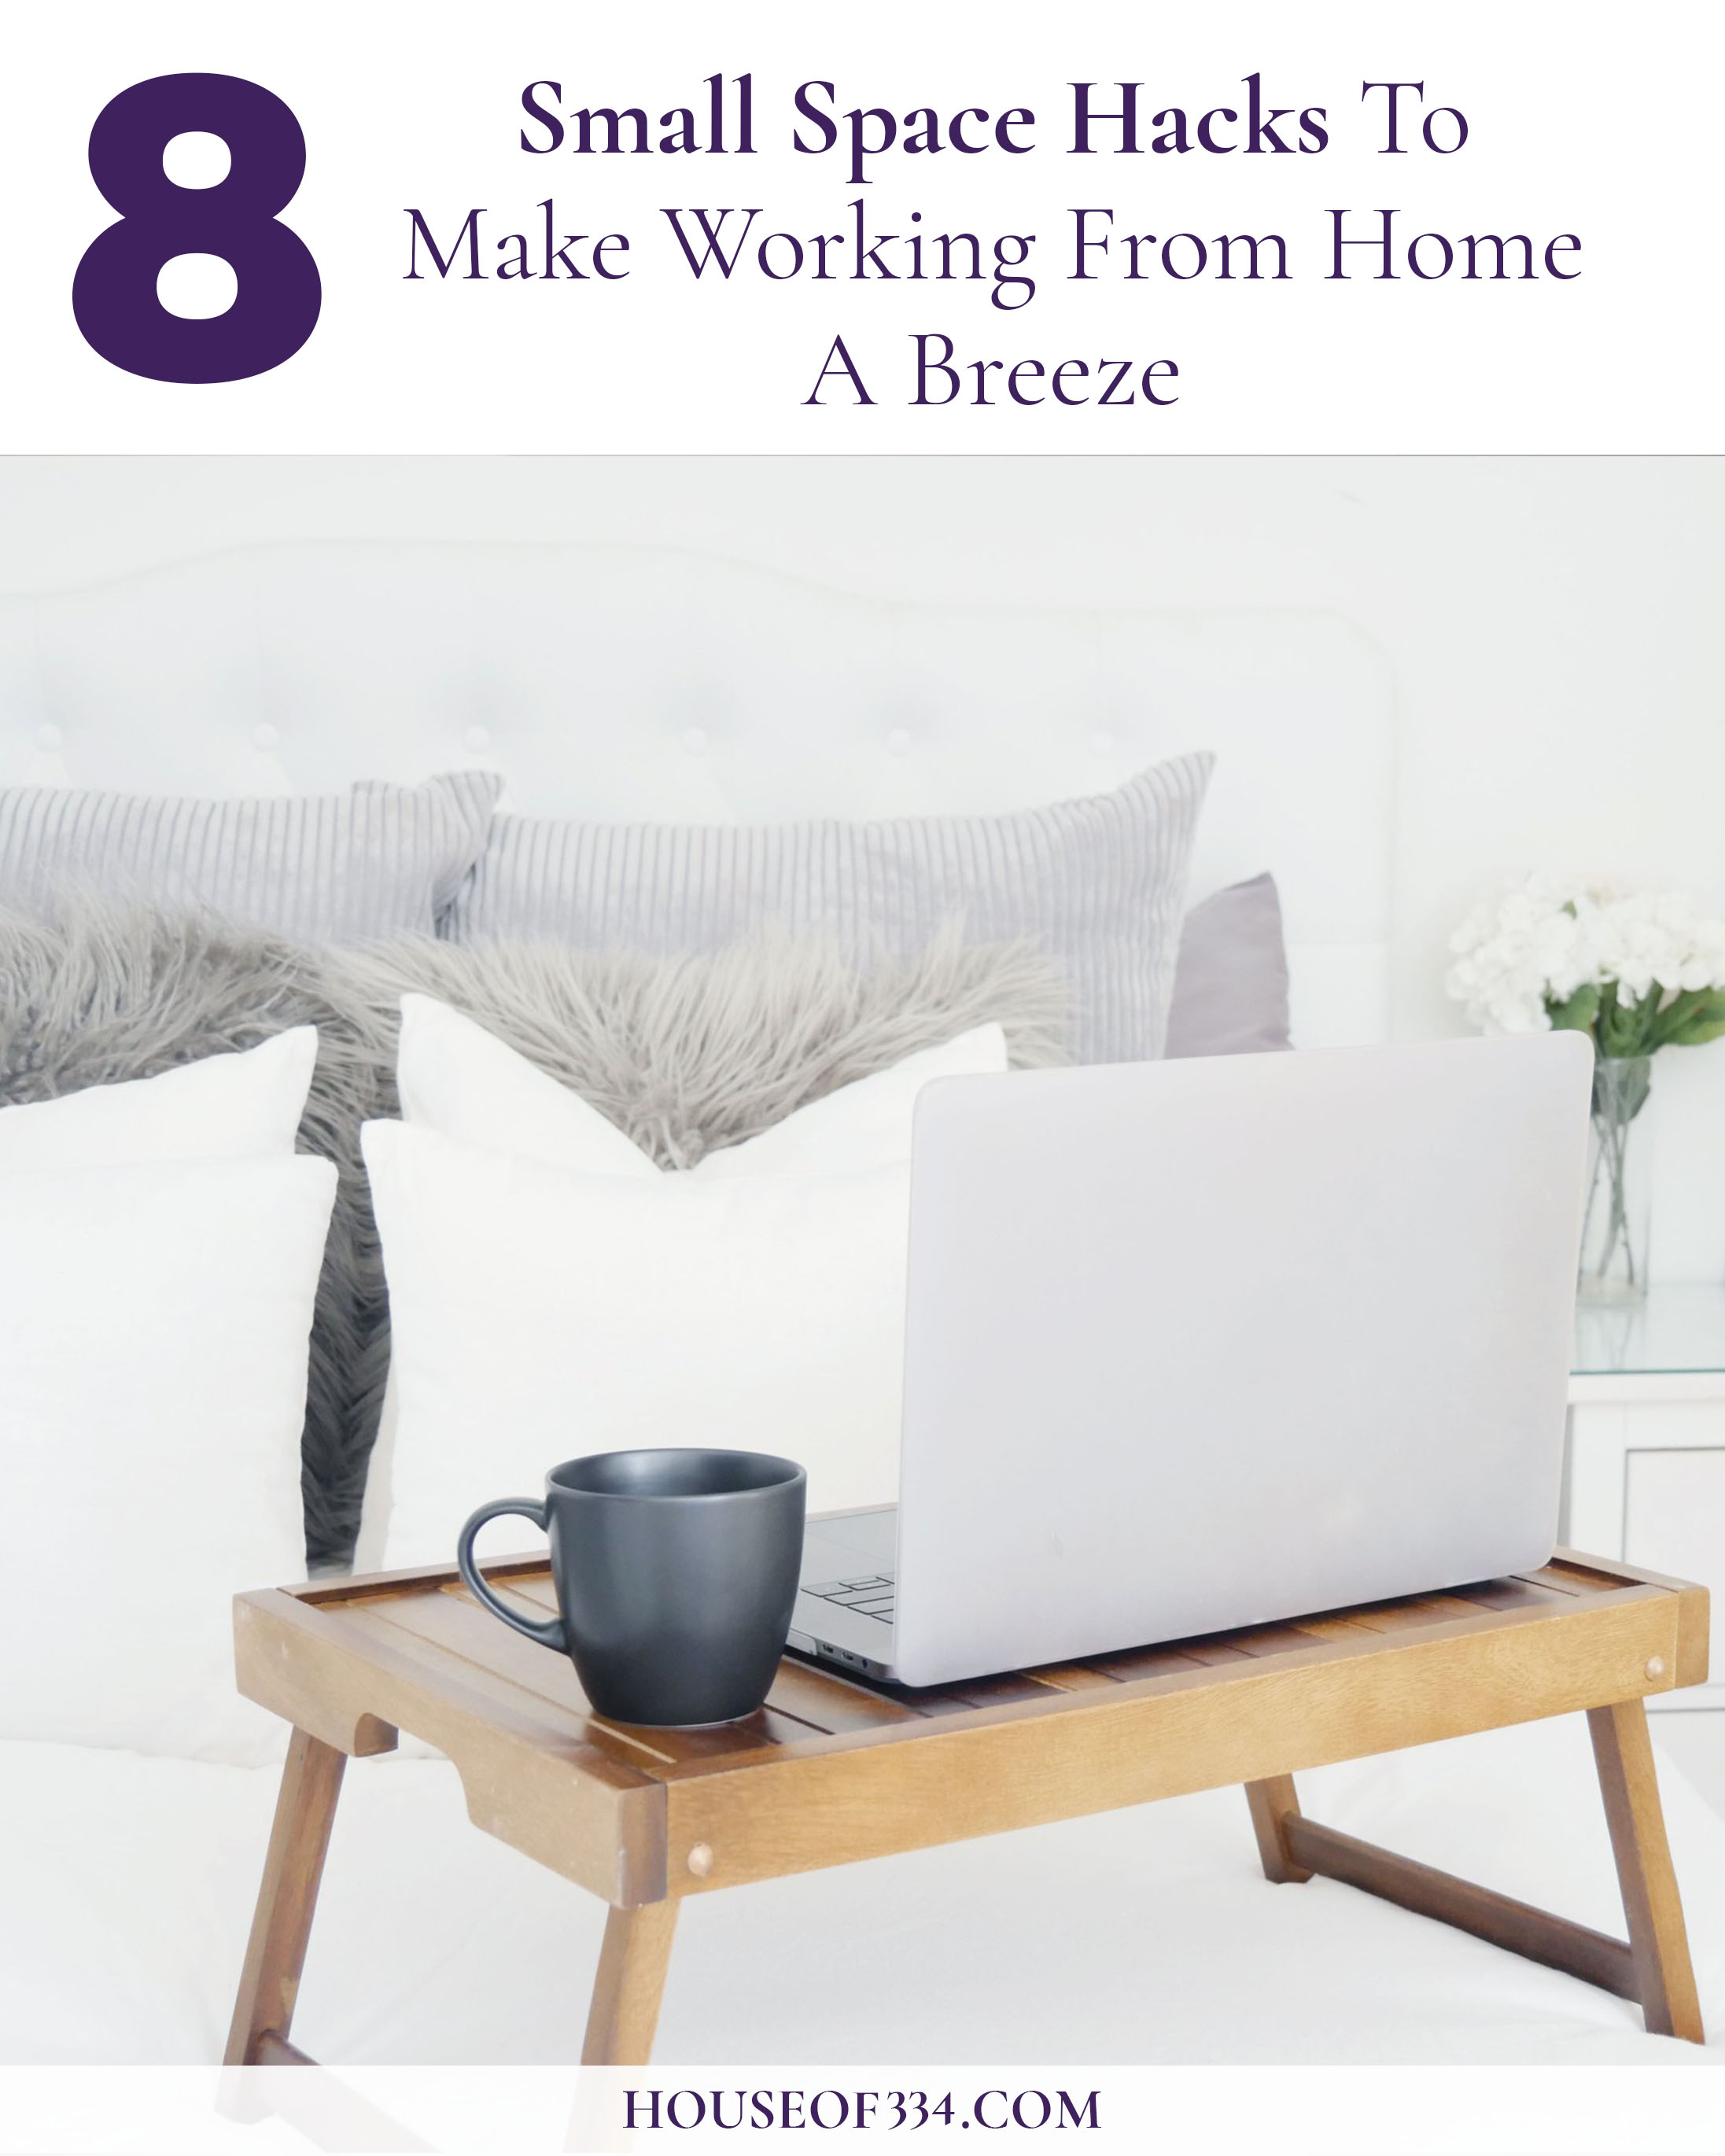 8 small space hacks to make working from home a breeze